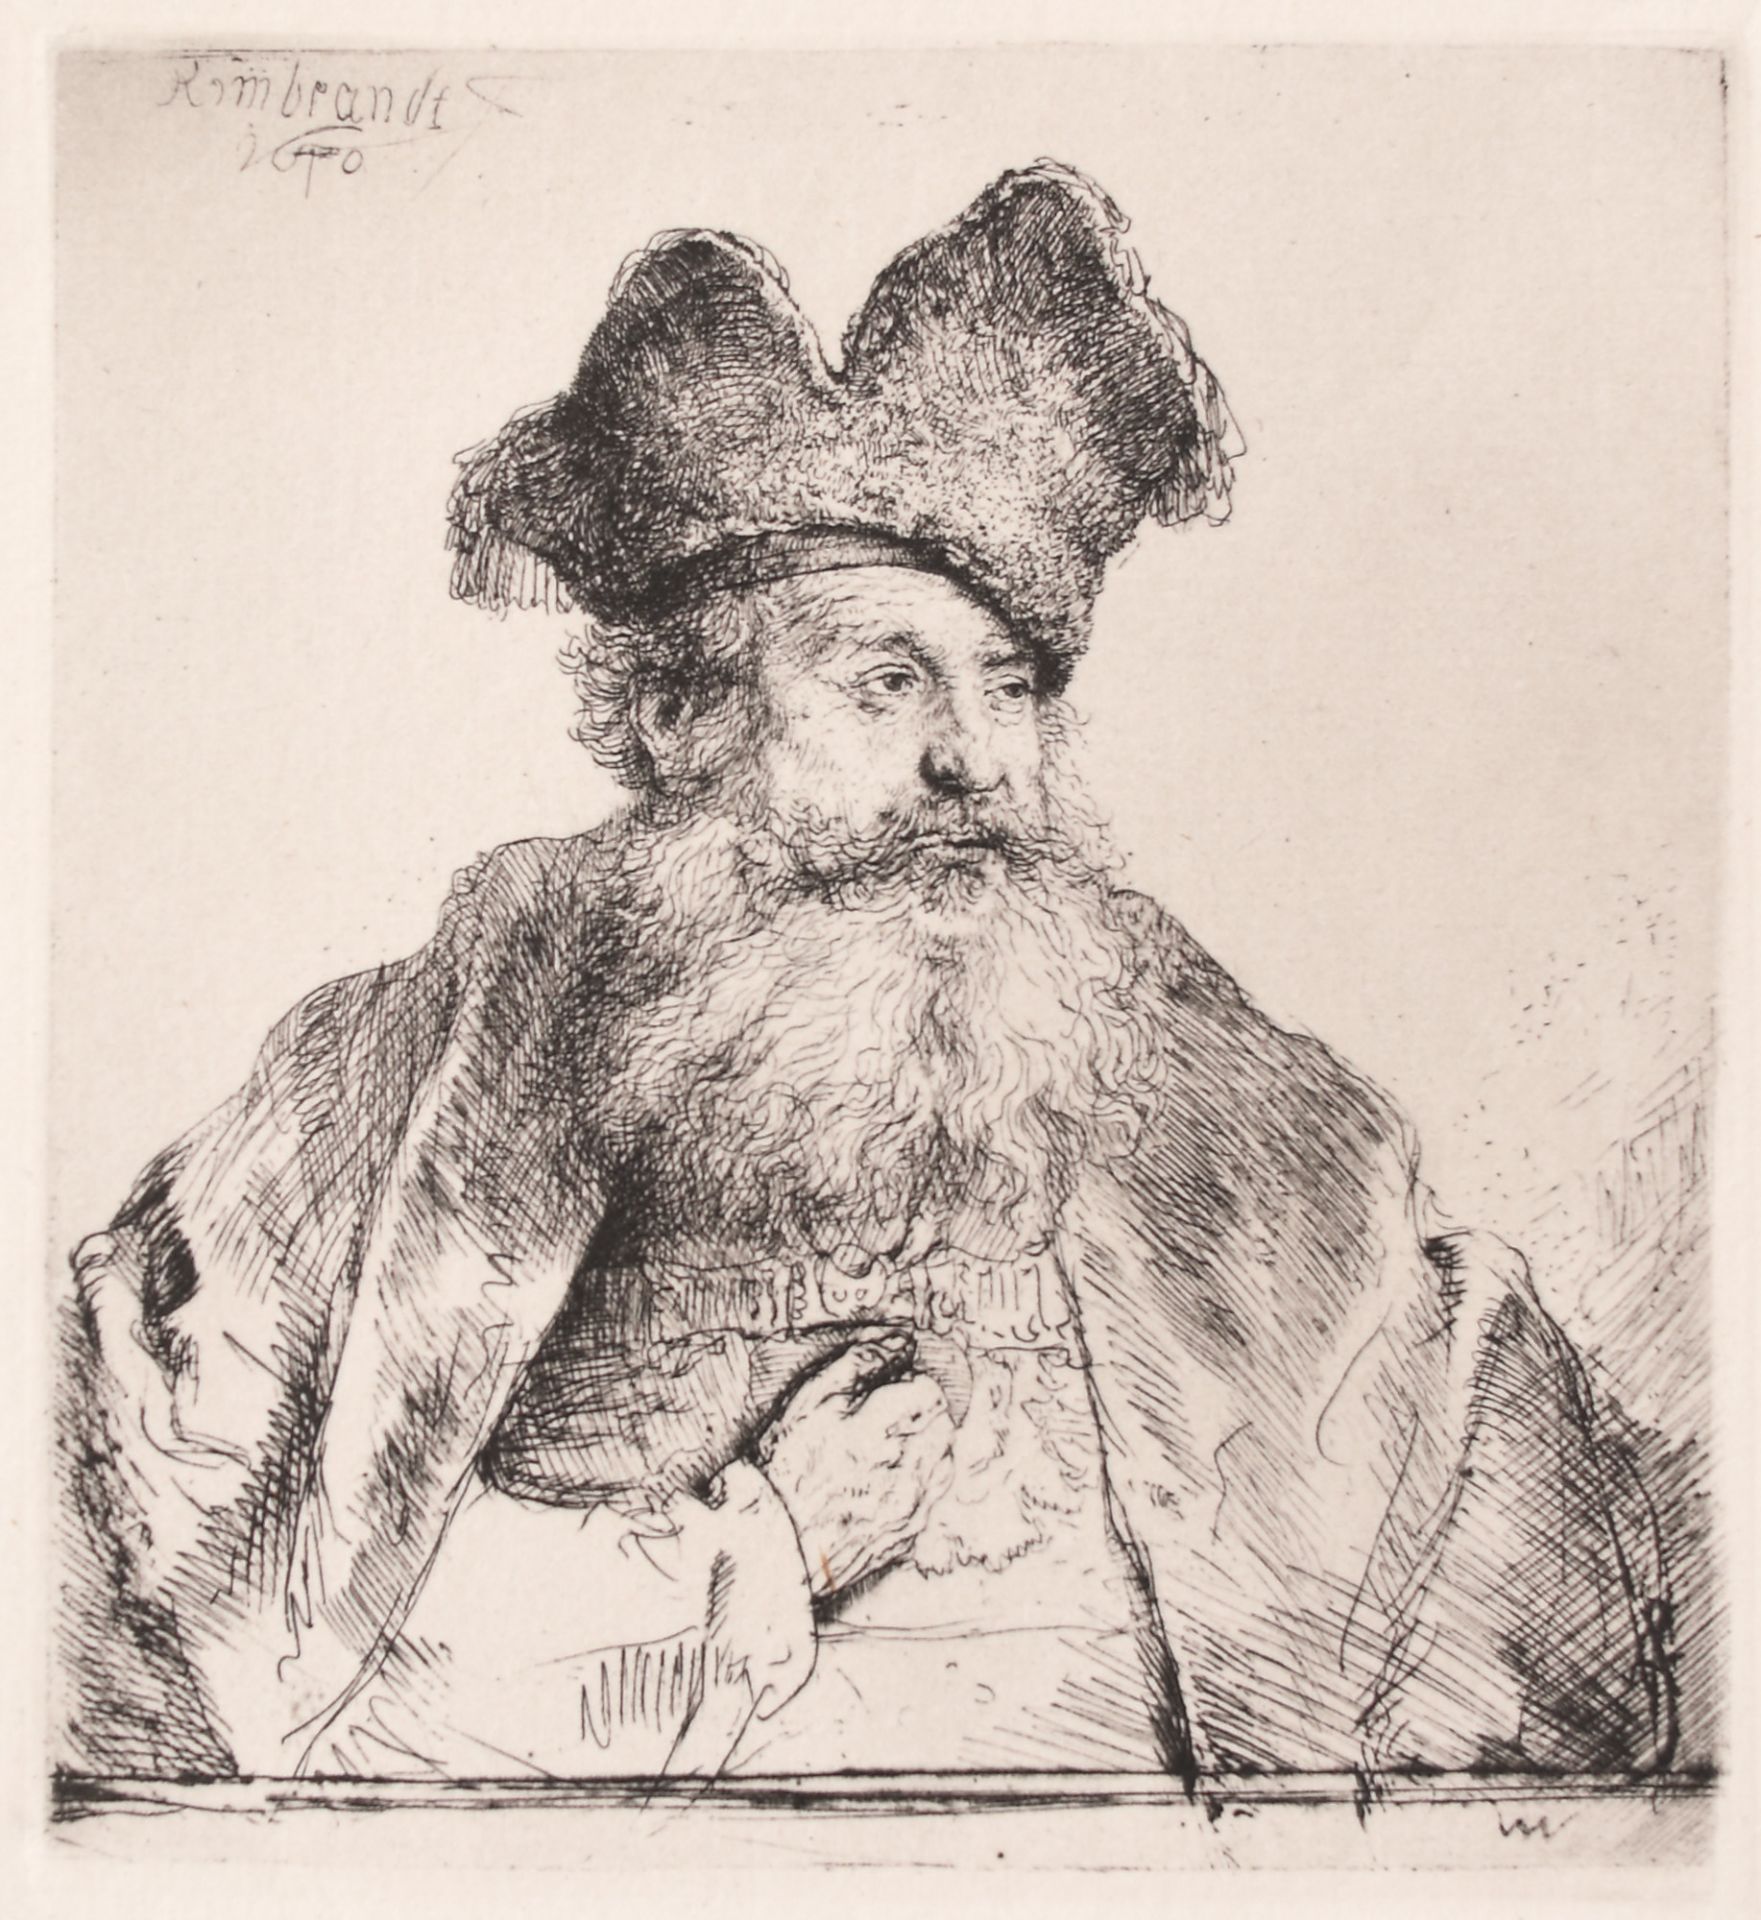 Rembrandt van Rijn, Old Man with a Fur Hat with a Split Upright Edge